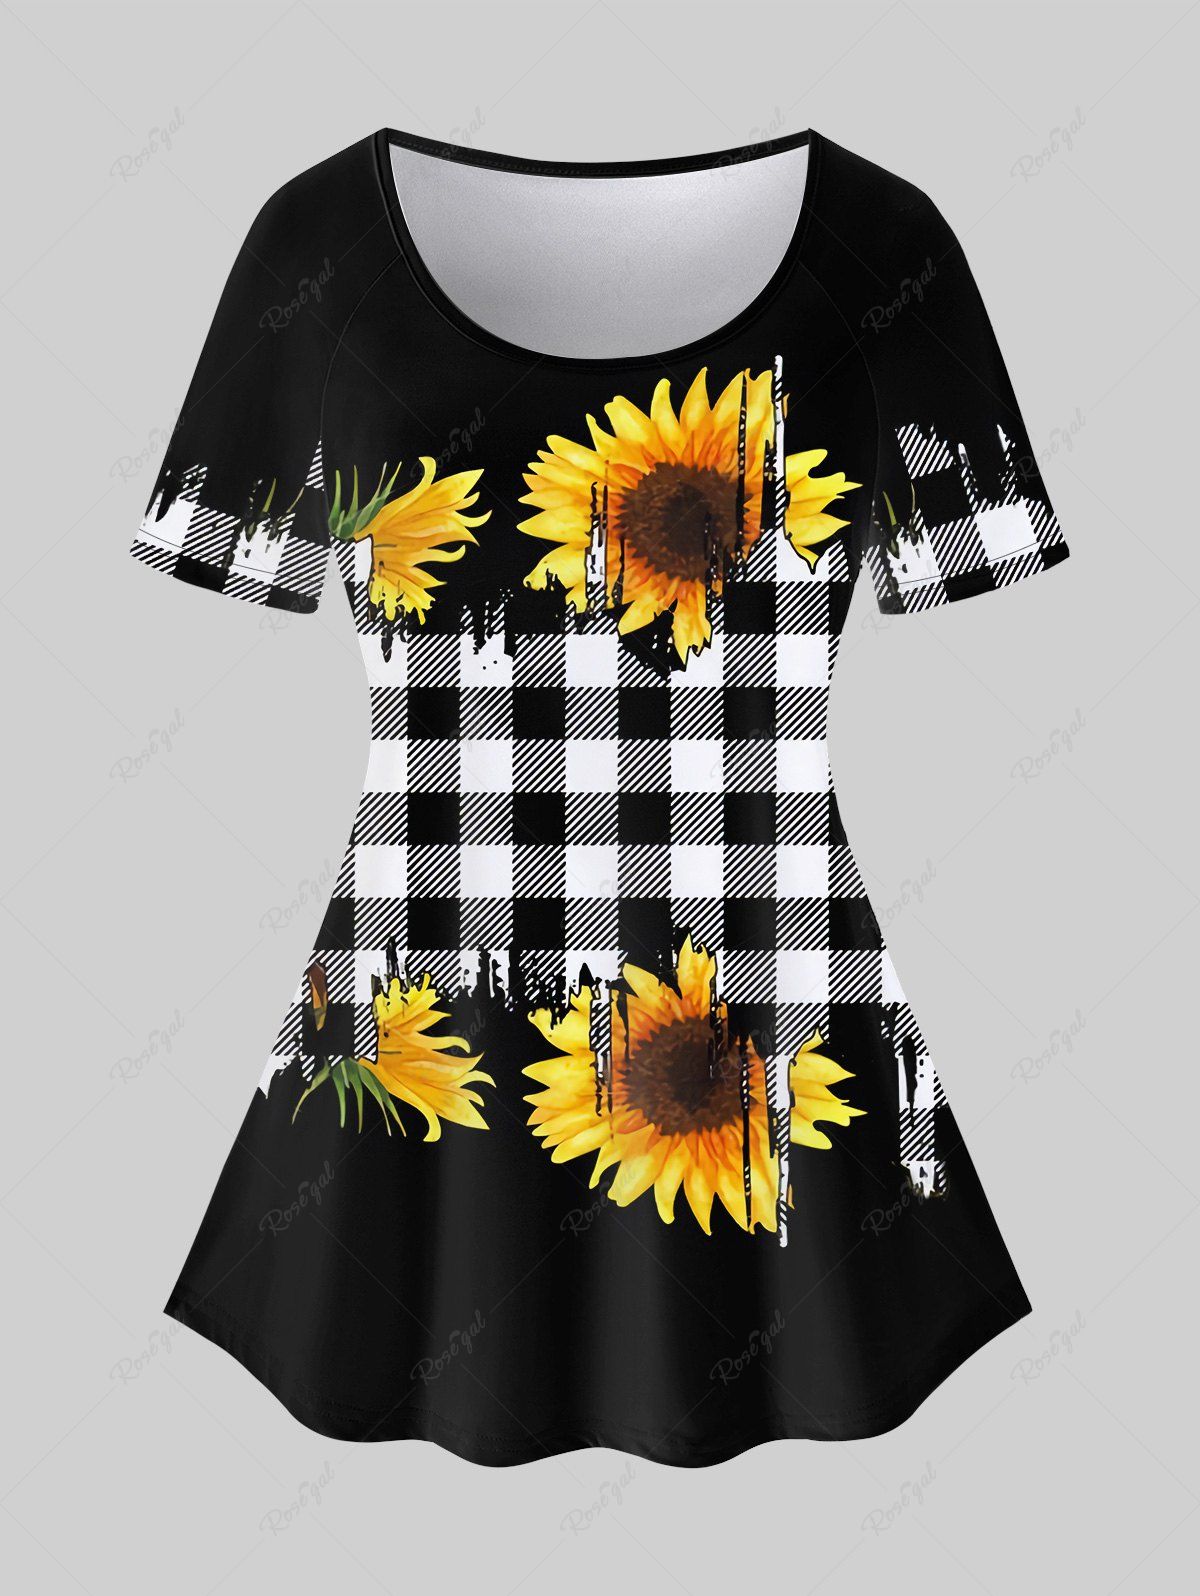 Discount Plus Size Sunflowers And Black White Checkered Print Raglan Sleeves Tee  